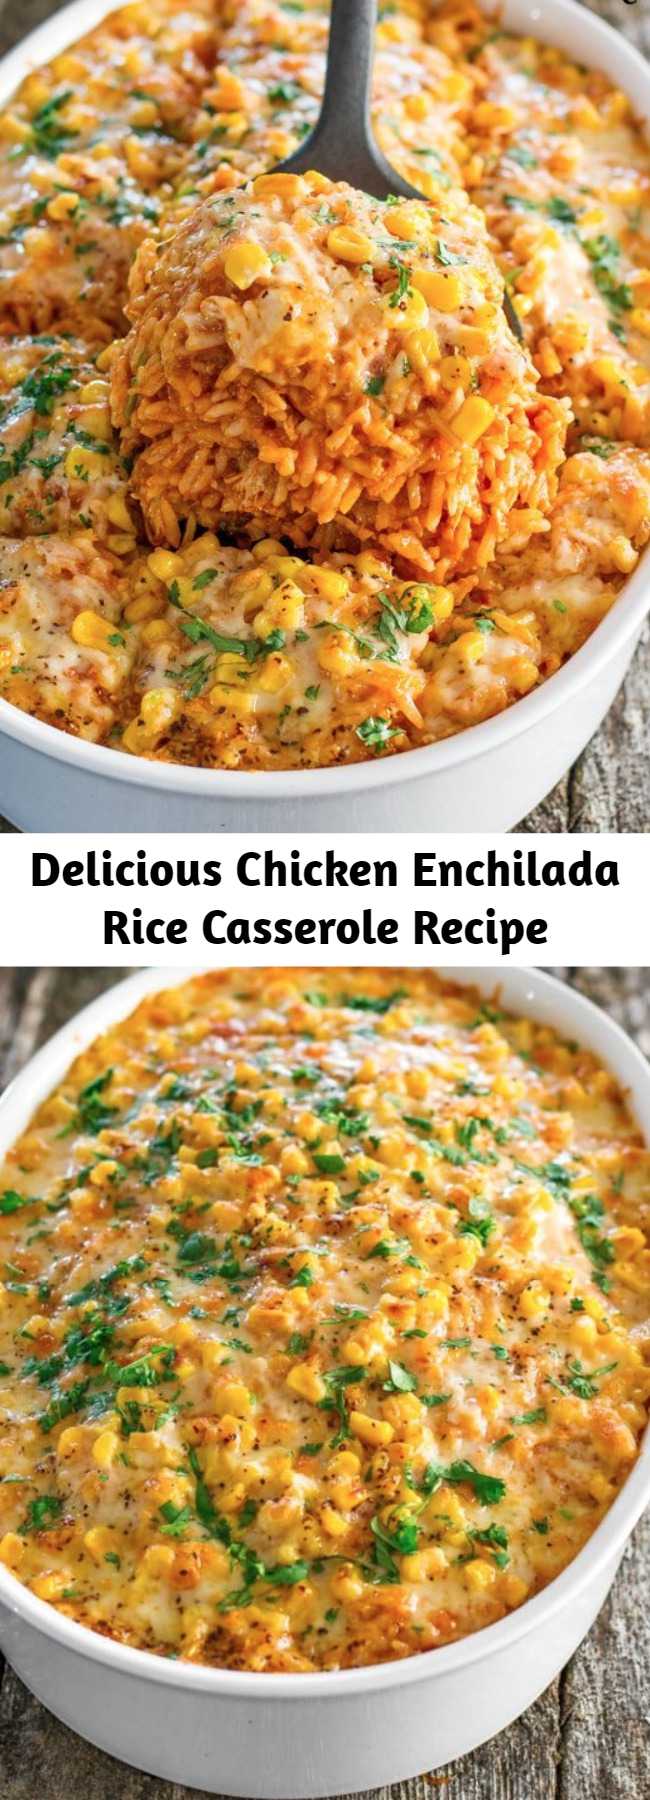 Delicious Chicken Enchilada Rice Casserole Recipe - All the makings of a chicken enchilada but with rice. It's simply delicious!